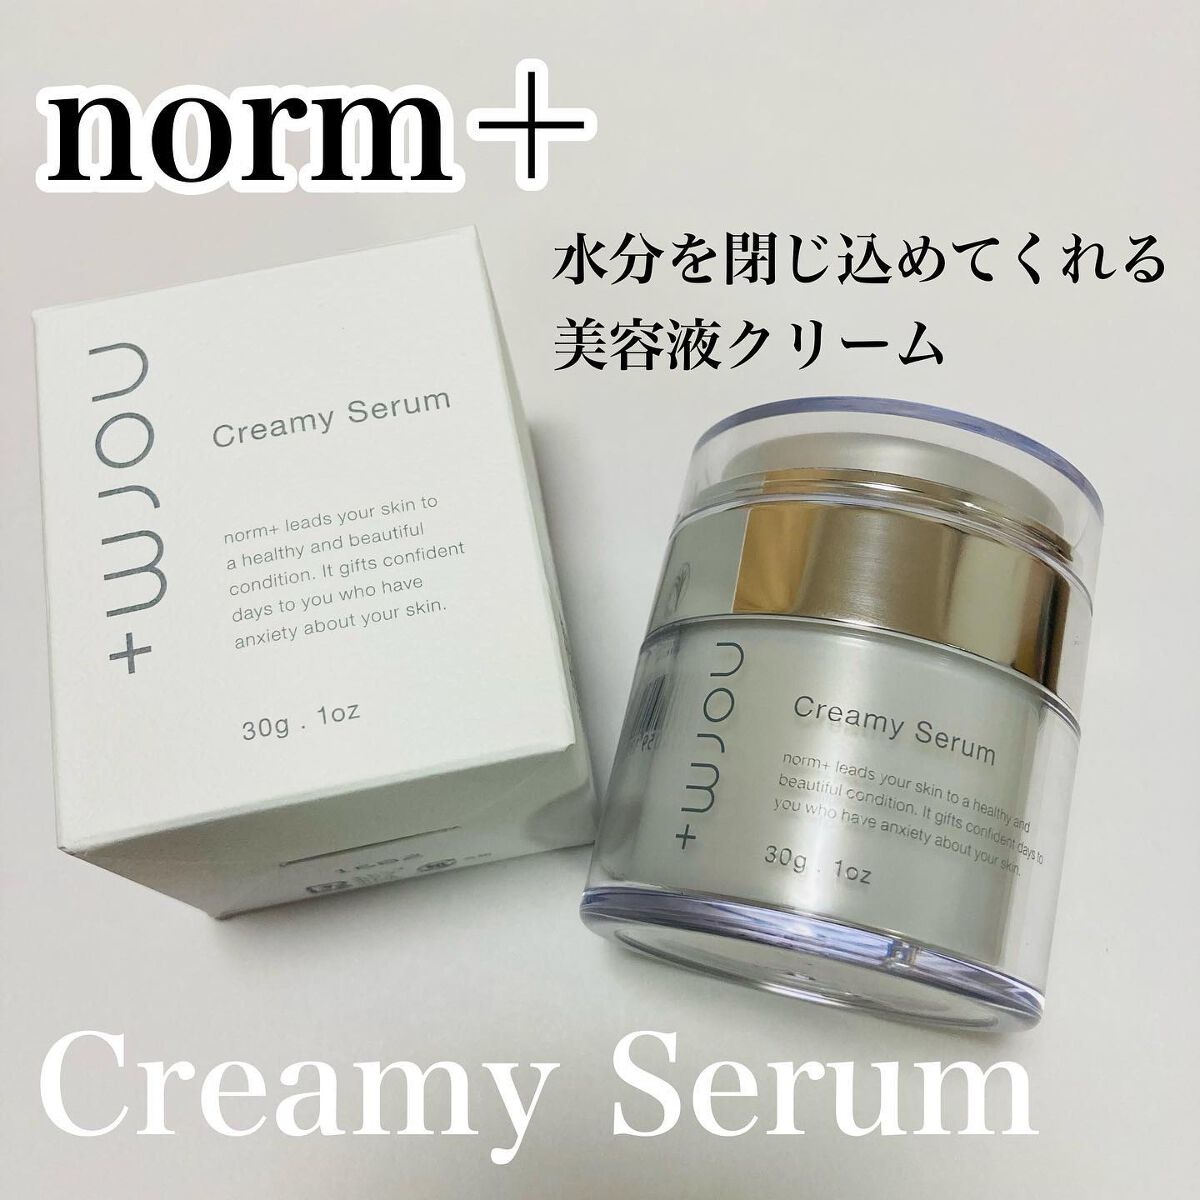 norm+ ノームプラス 化粧水 クリーム 洗顔 3点セット www